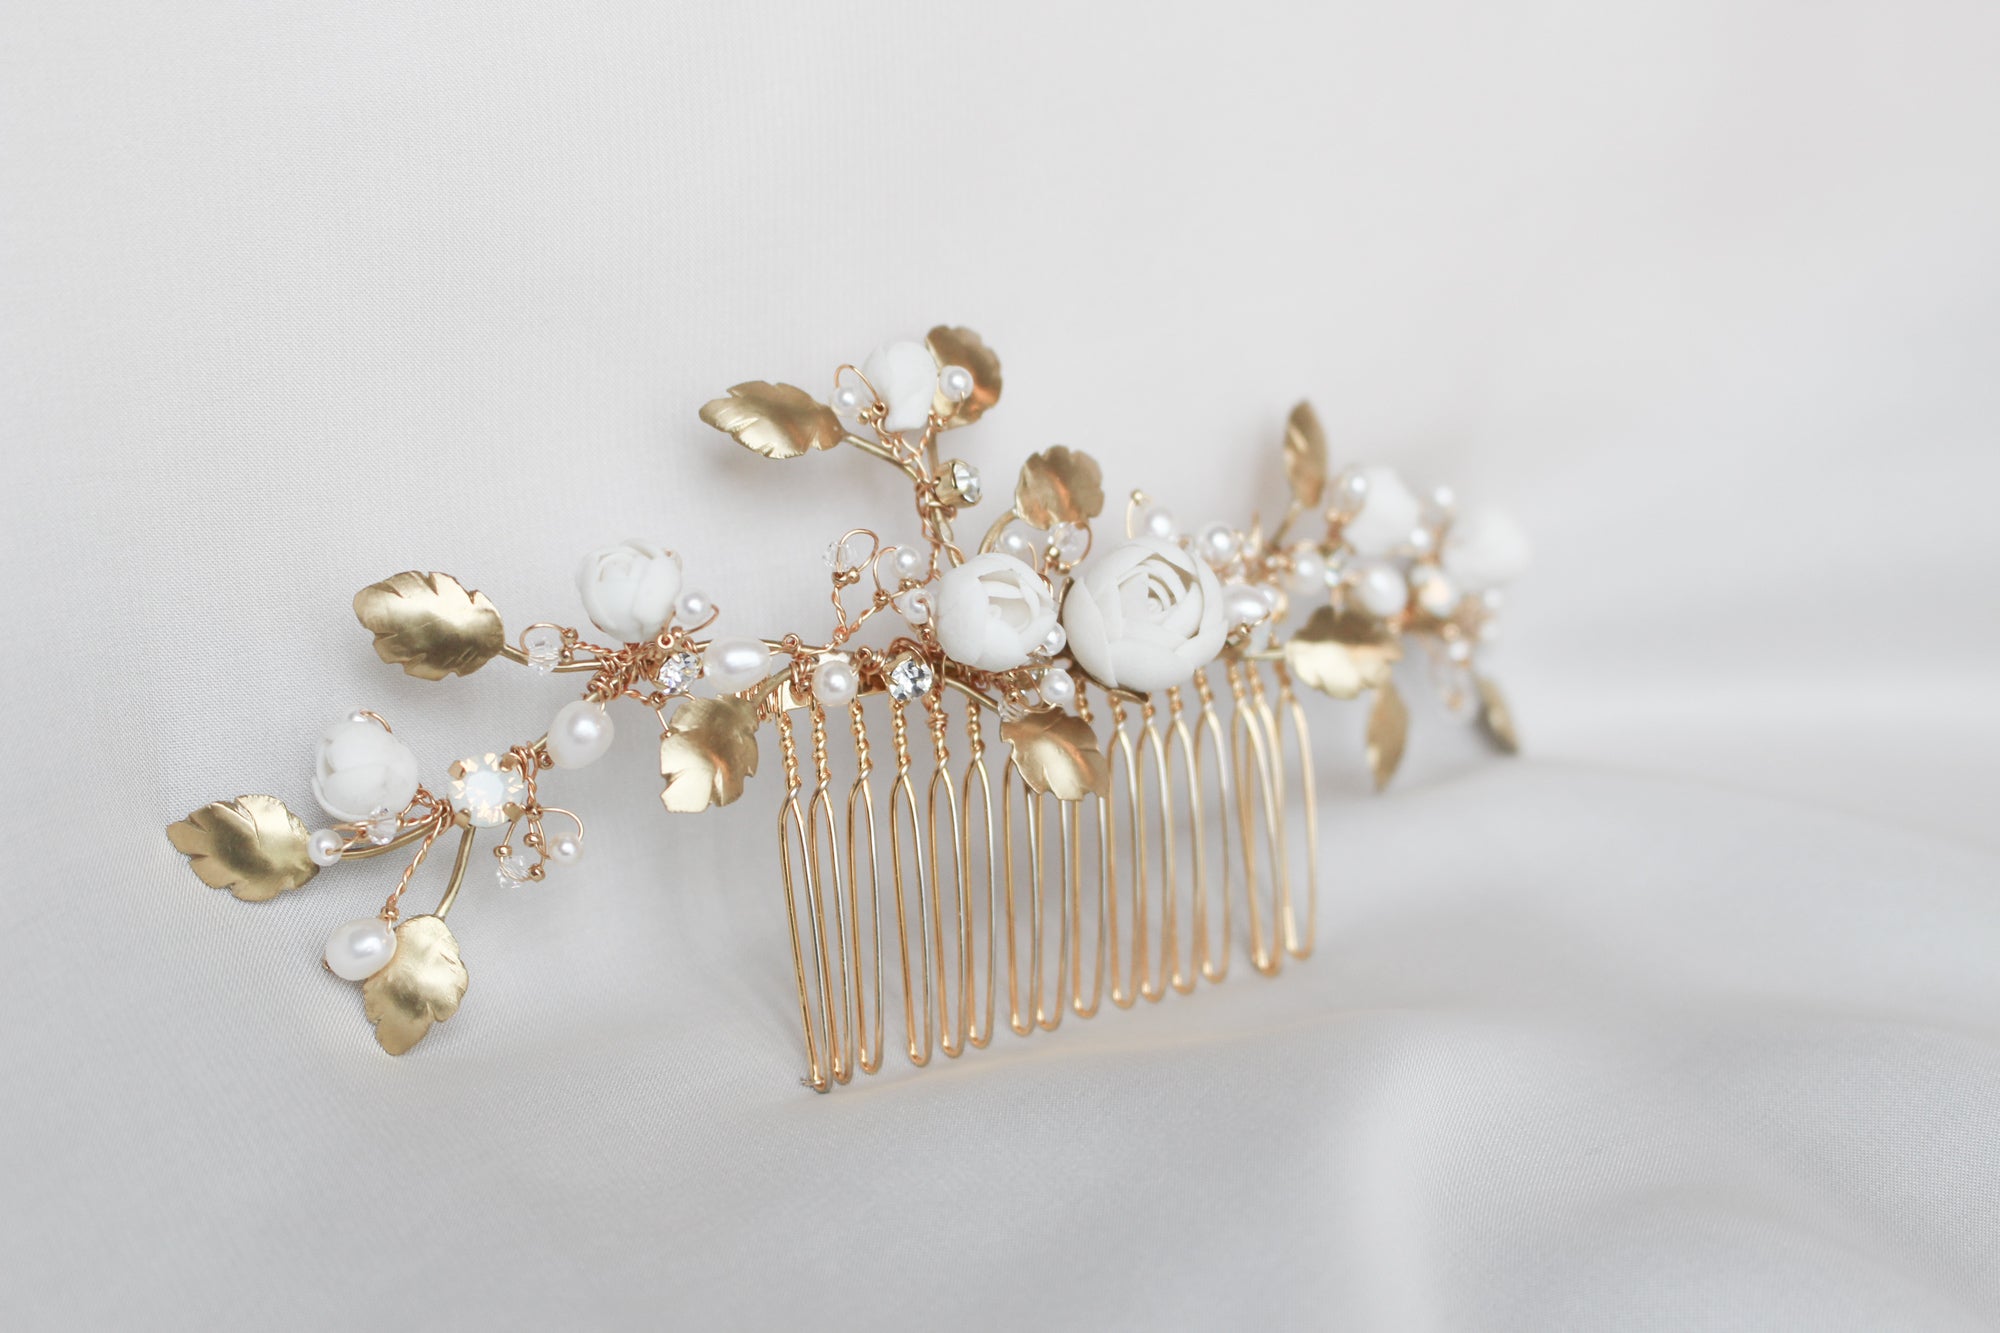 Porcelain Flowers and Raw Brass Leaves Wedding Comb by Alain Granell